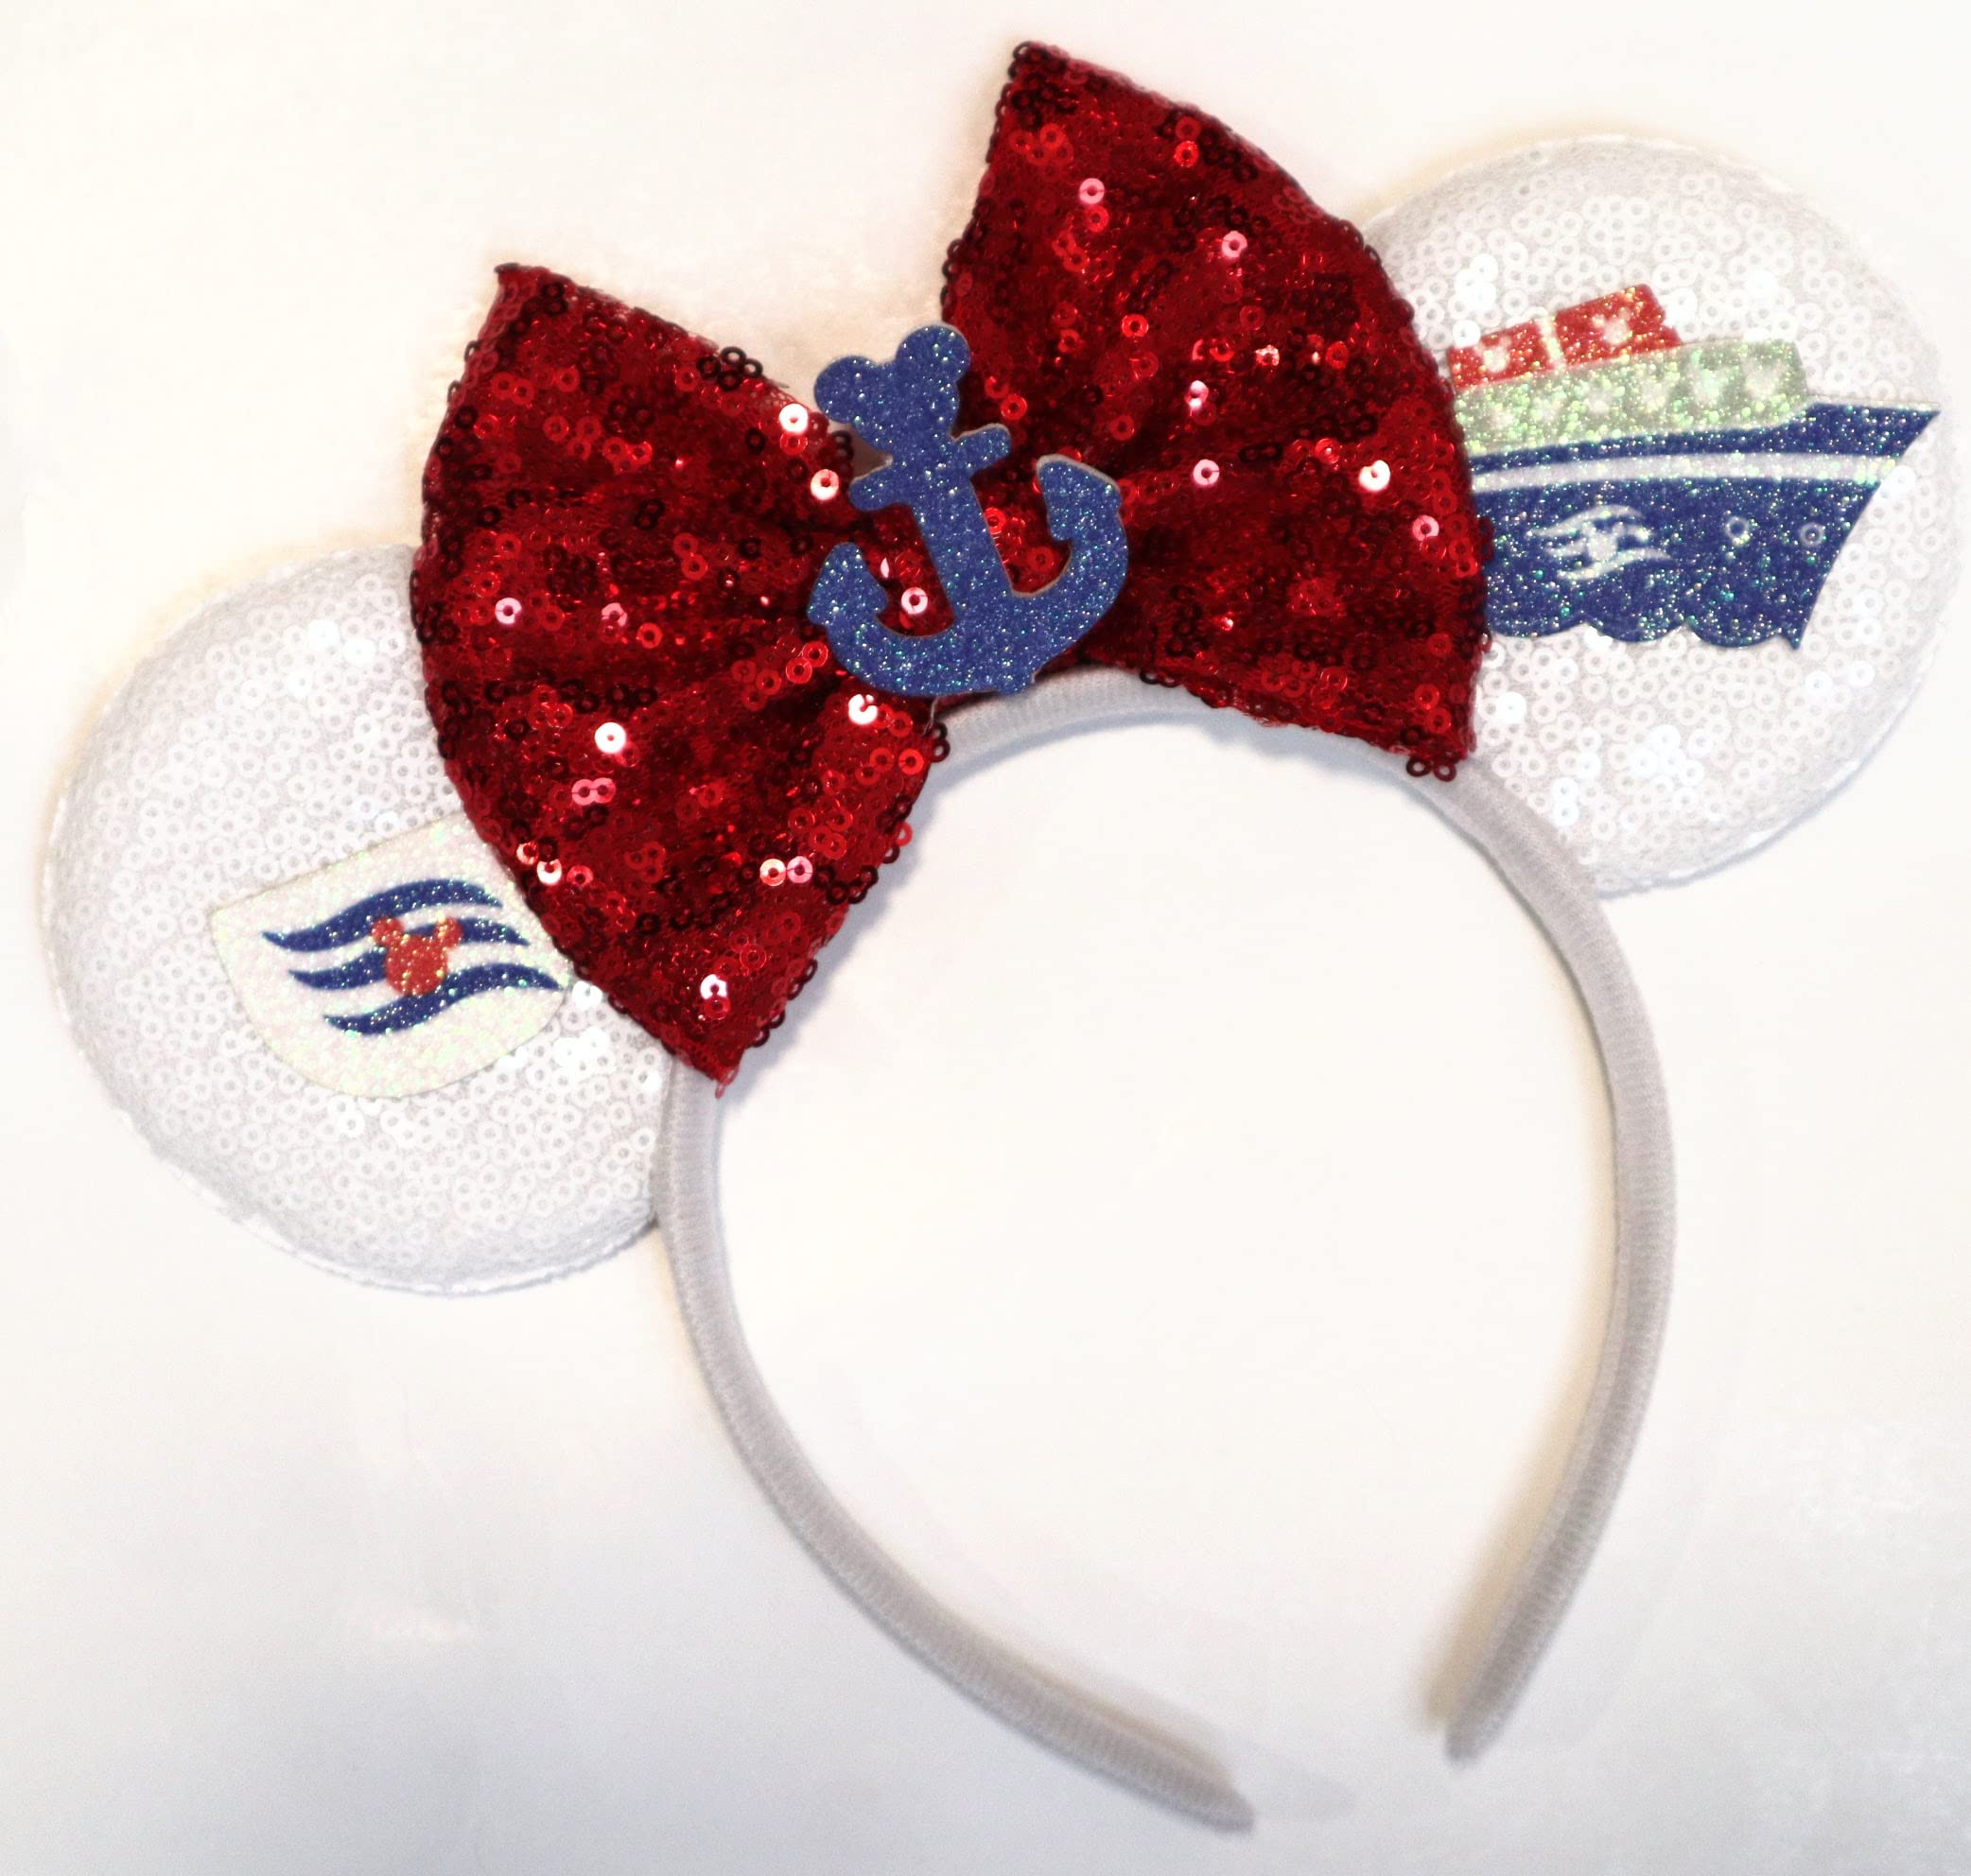 cLgIFT cruise Minnie Ears,Pick your color, Boat Minnie Ears, Nautical minnie ears, Rainbow Sparkle Mouse Ears,classic Red Sequin